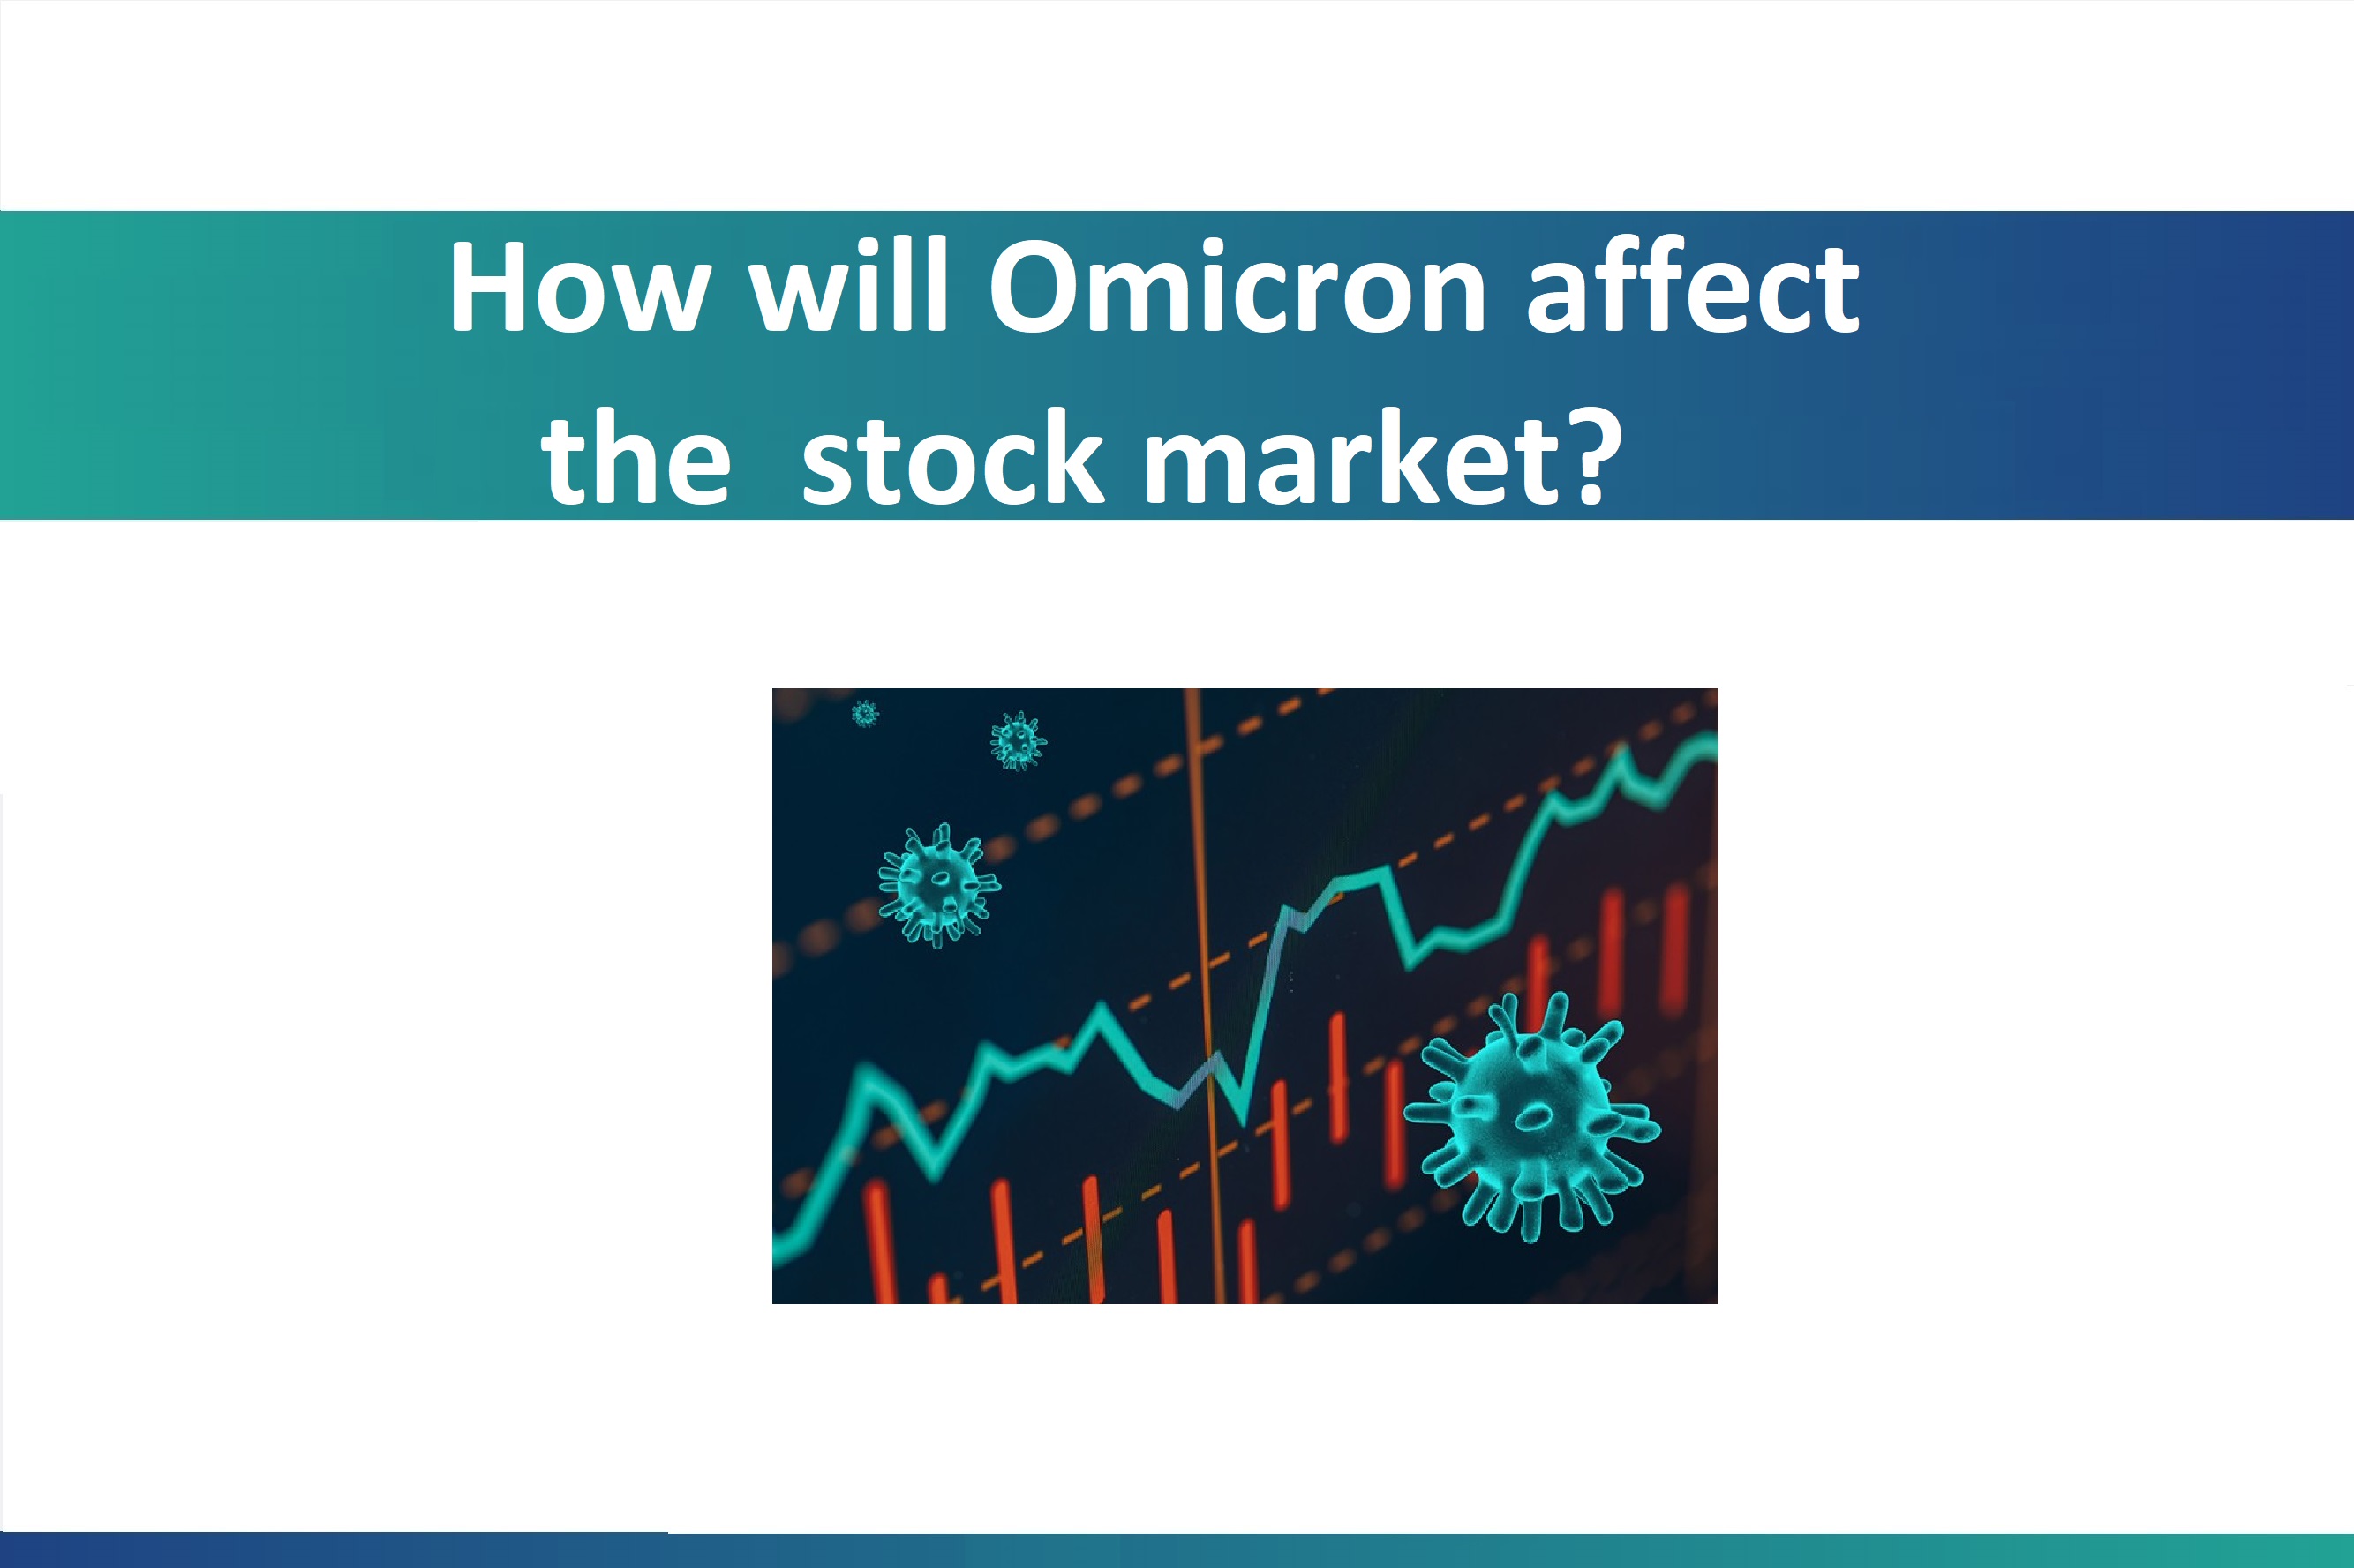 How will Omicron affect the stock market?